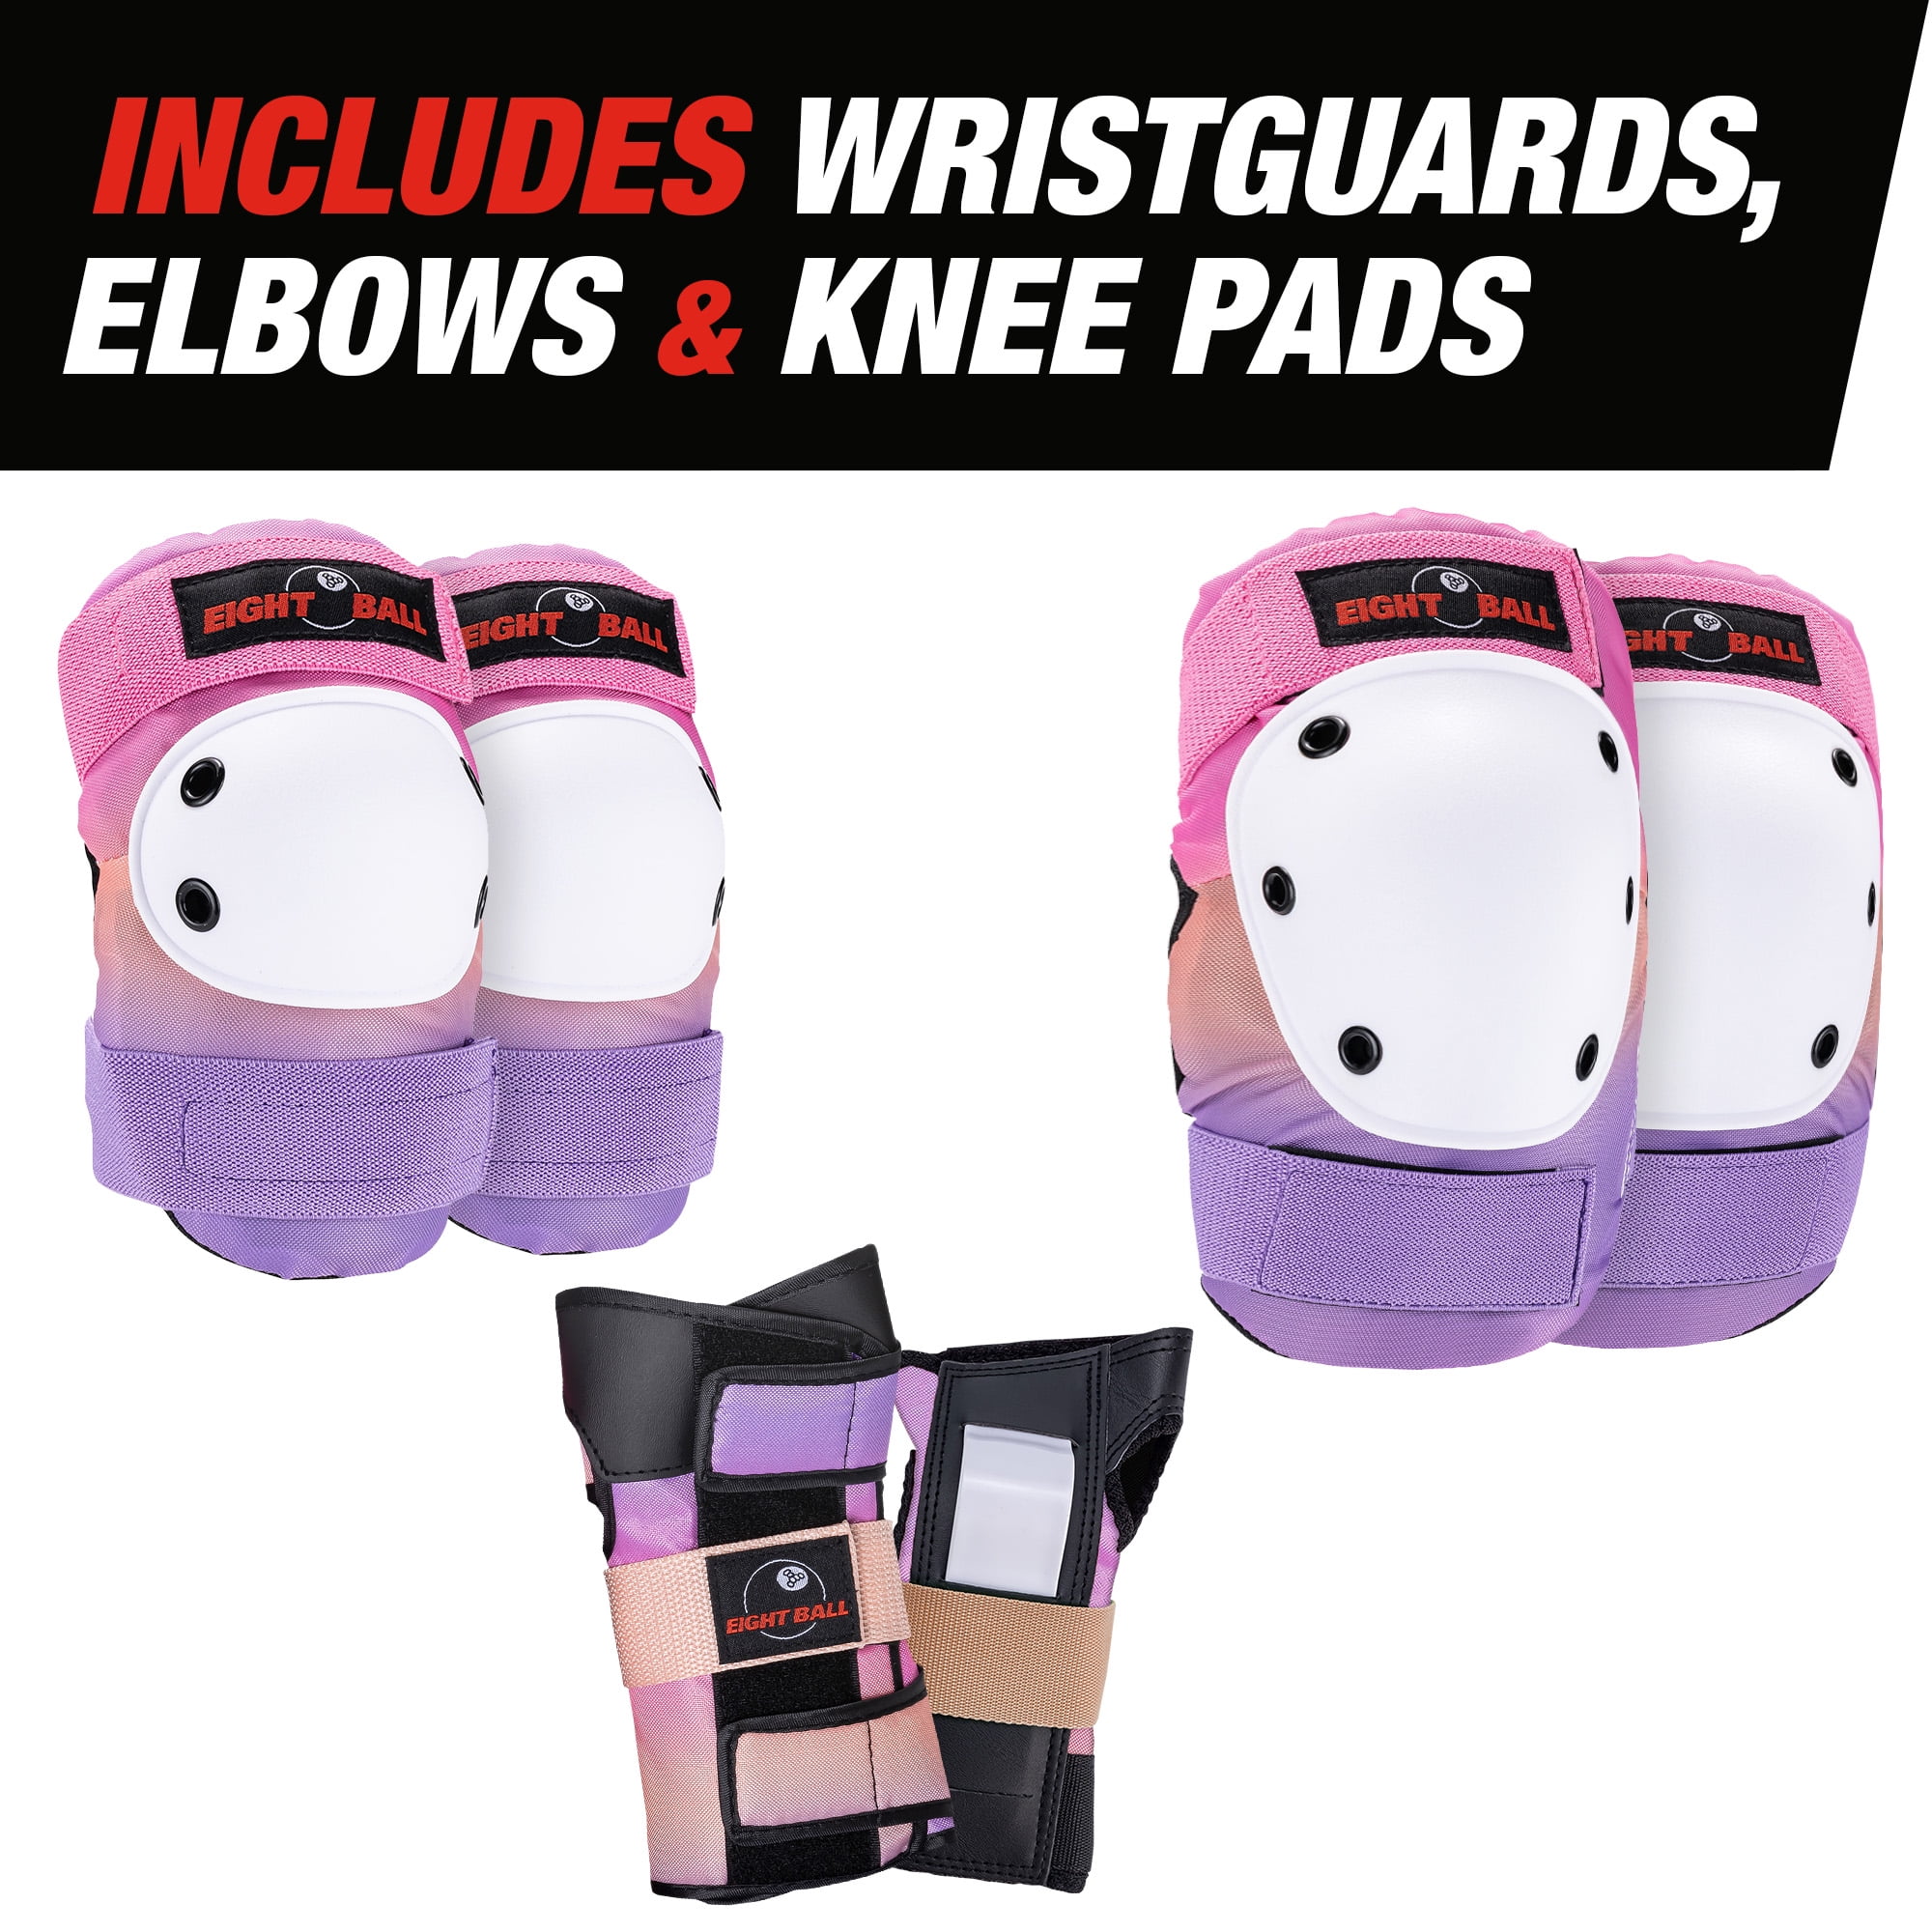 Eight Ball Kids Multi-Sport Pad Set with Knee Pads Elbow Pads and Wristguards 